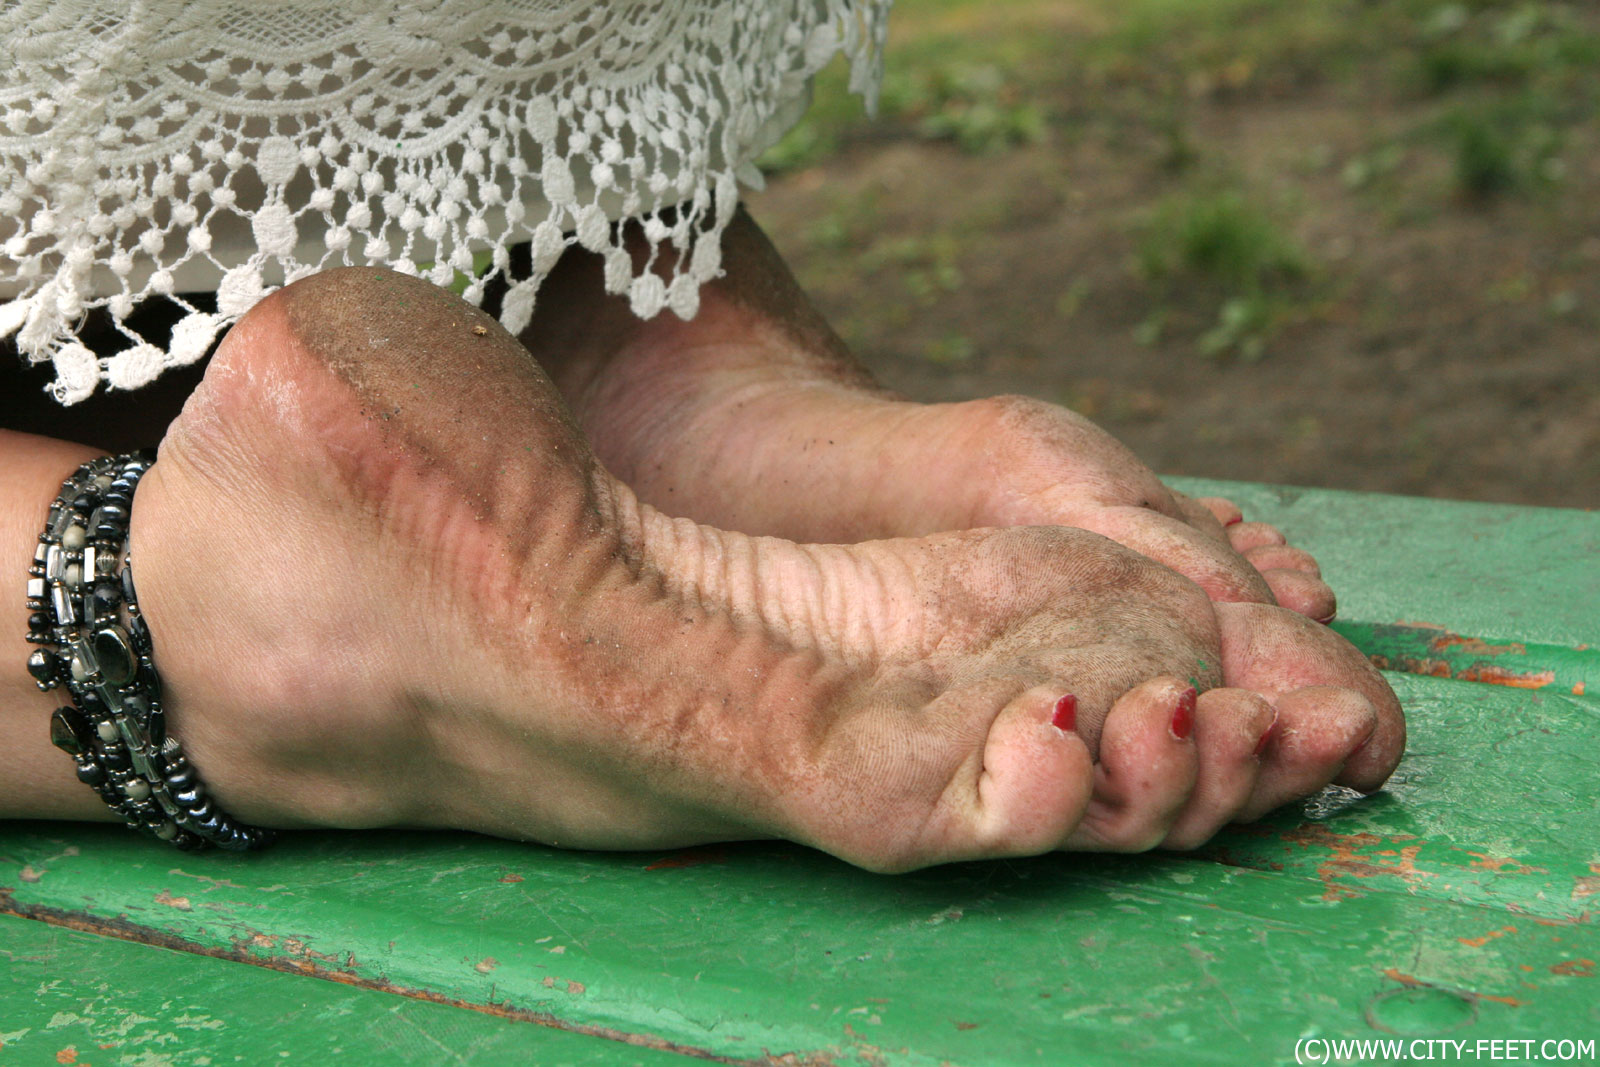 Mamilatina wrinkled soles boot removed